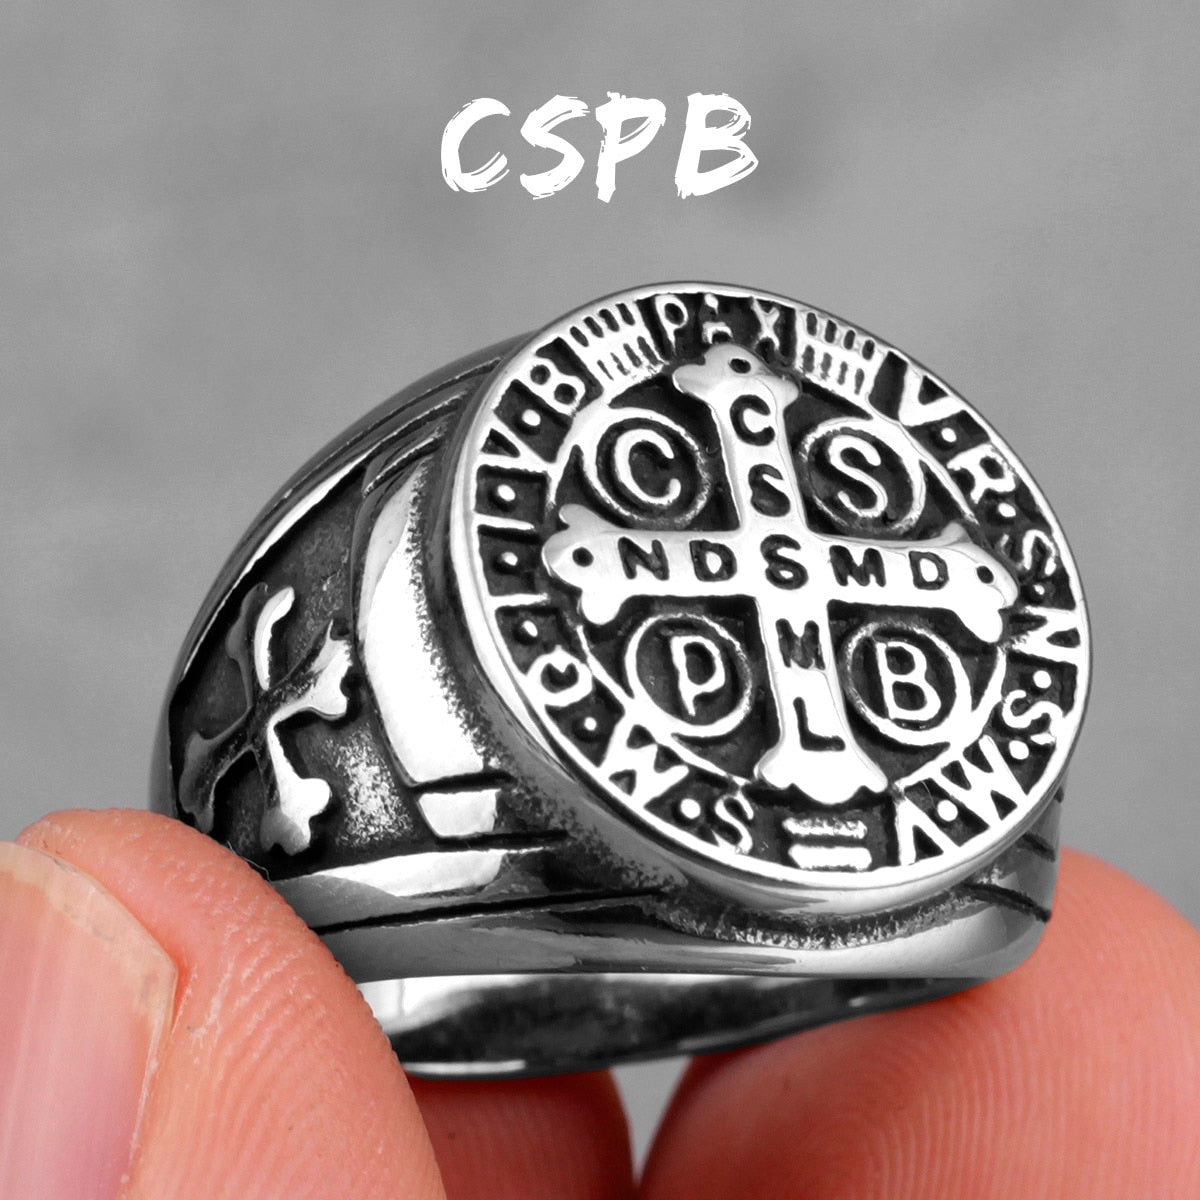 Exorcism Saint Benedict Cspb Cross Men Rings Punk Hip Hop for Boyfriend Male Stainless Steel Jewelry Creativity Gift R460-Silver